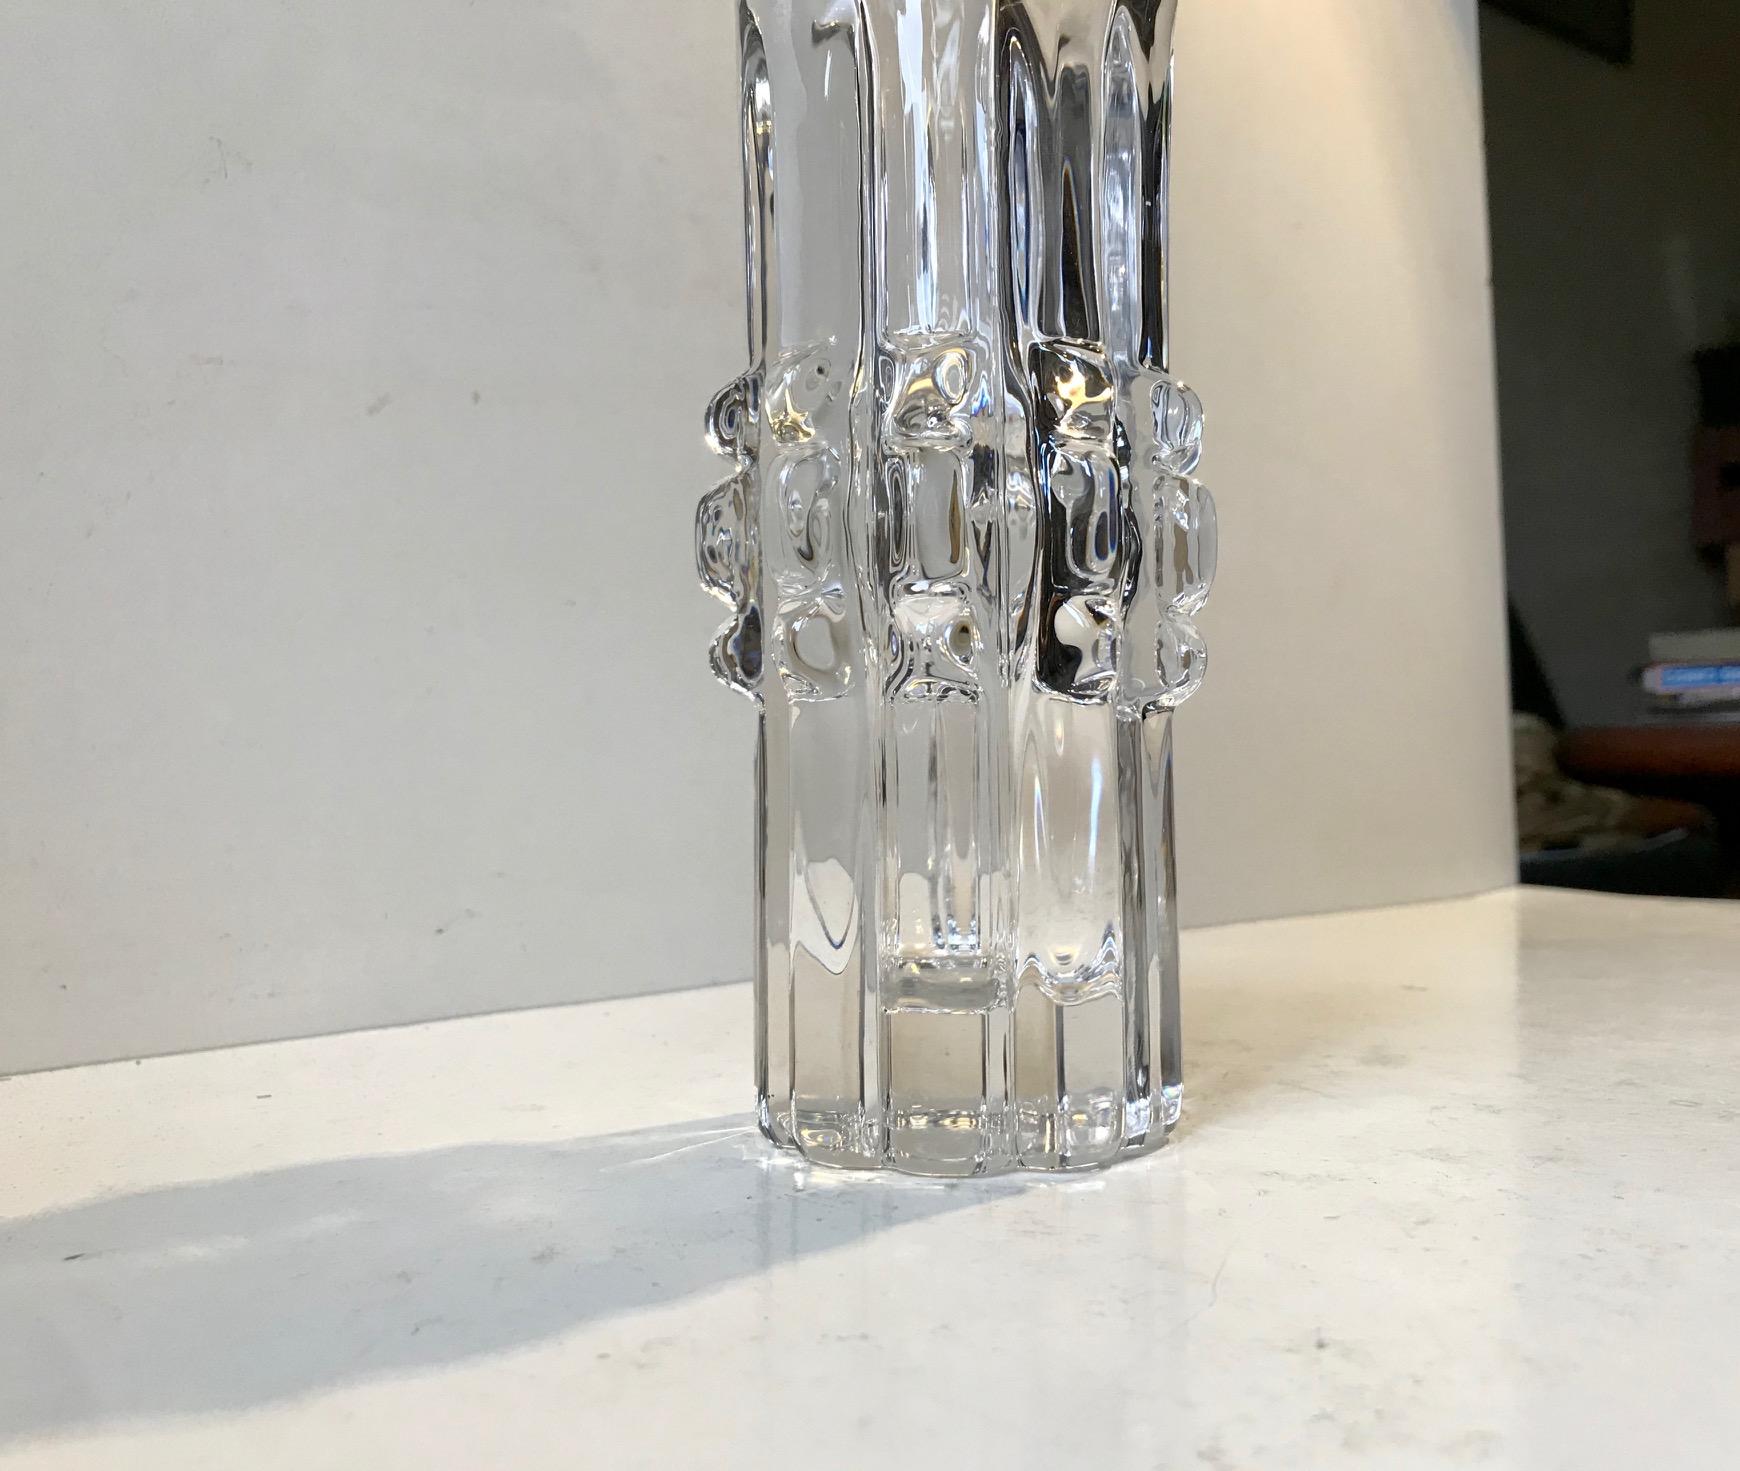 A sculptural crystal vase designed by Bengt Edenfalk and manufactured by Royal Krona in Skruf Sweden during the 1970s. It is signed by the designer in hand to the base and features the crest mark of Royal Krona.